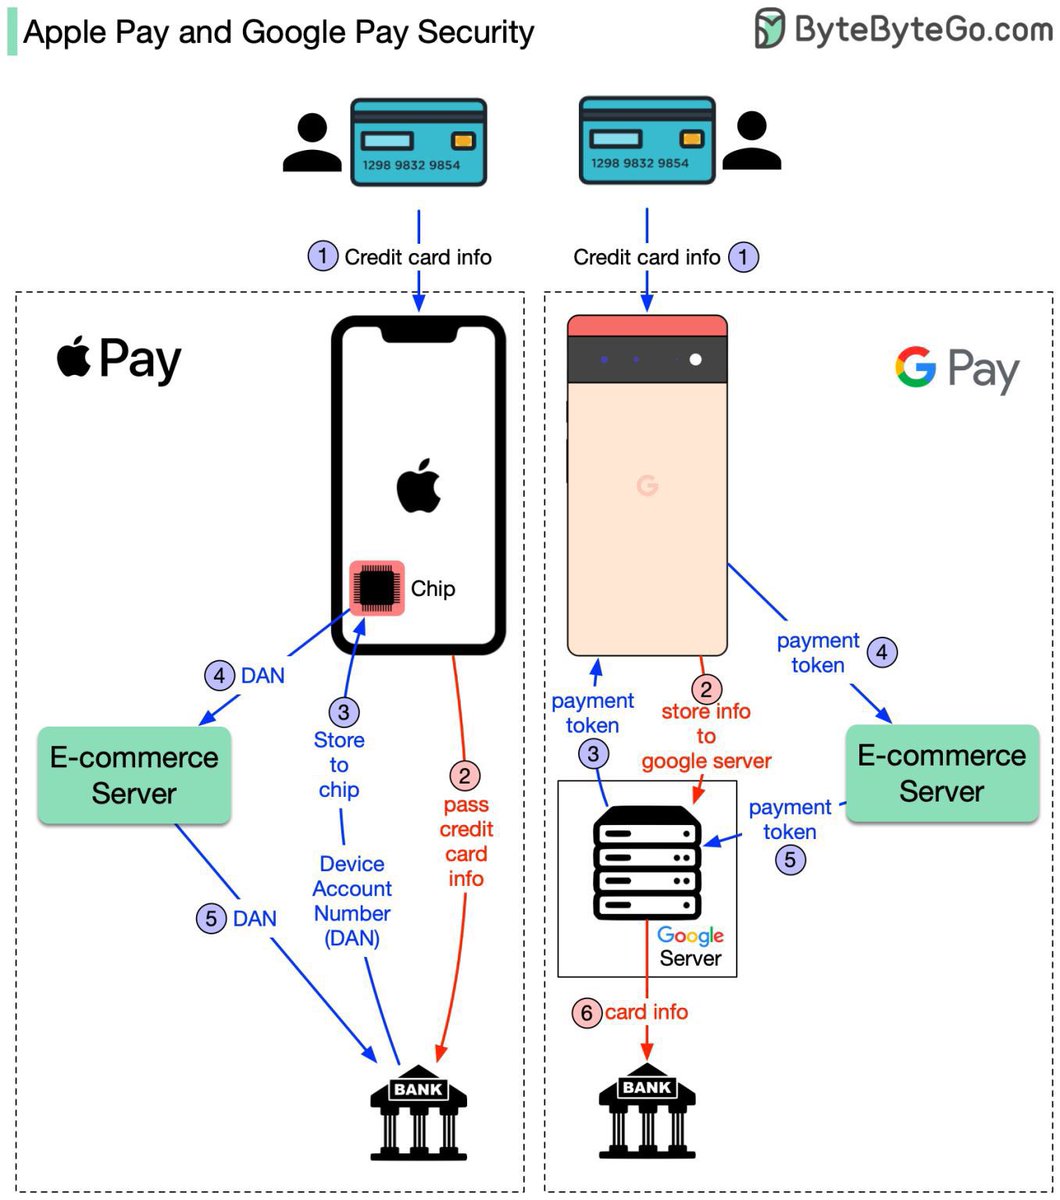 The reality of Google Pay compared to Apple Pay Now you know - Google knows about every fking payment you make while Apple doesn't Apple is the most secure platform.